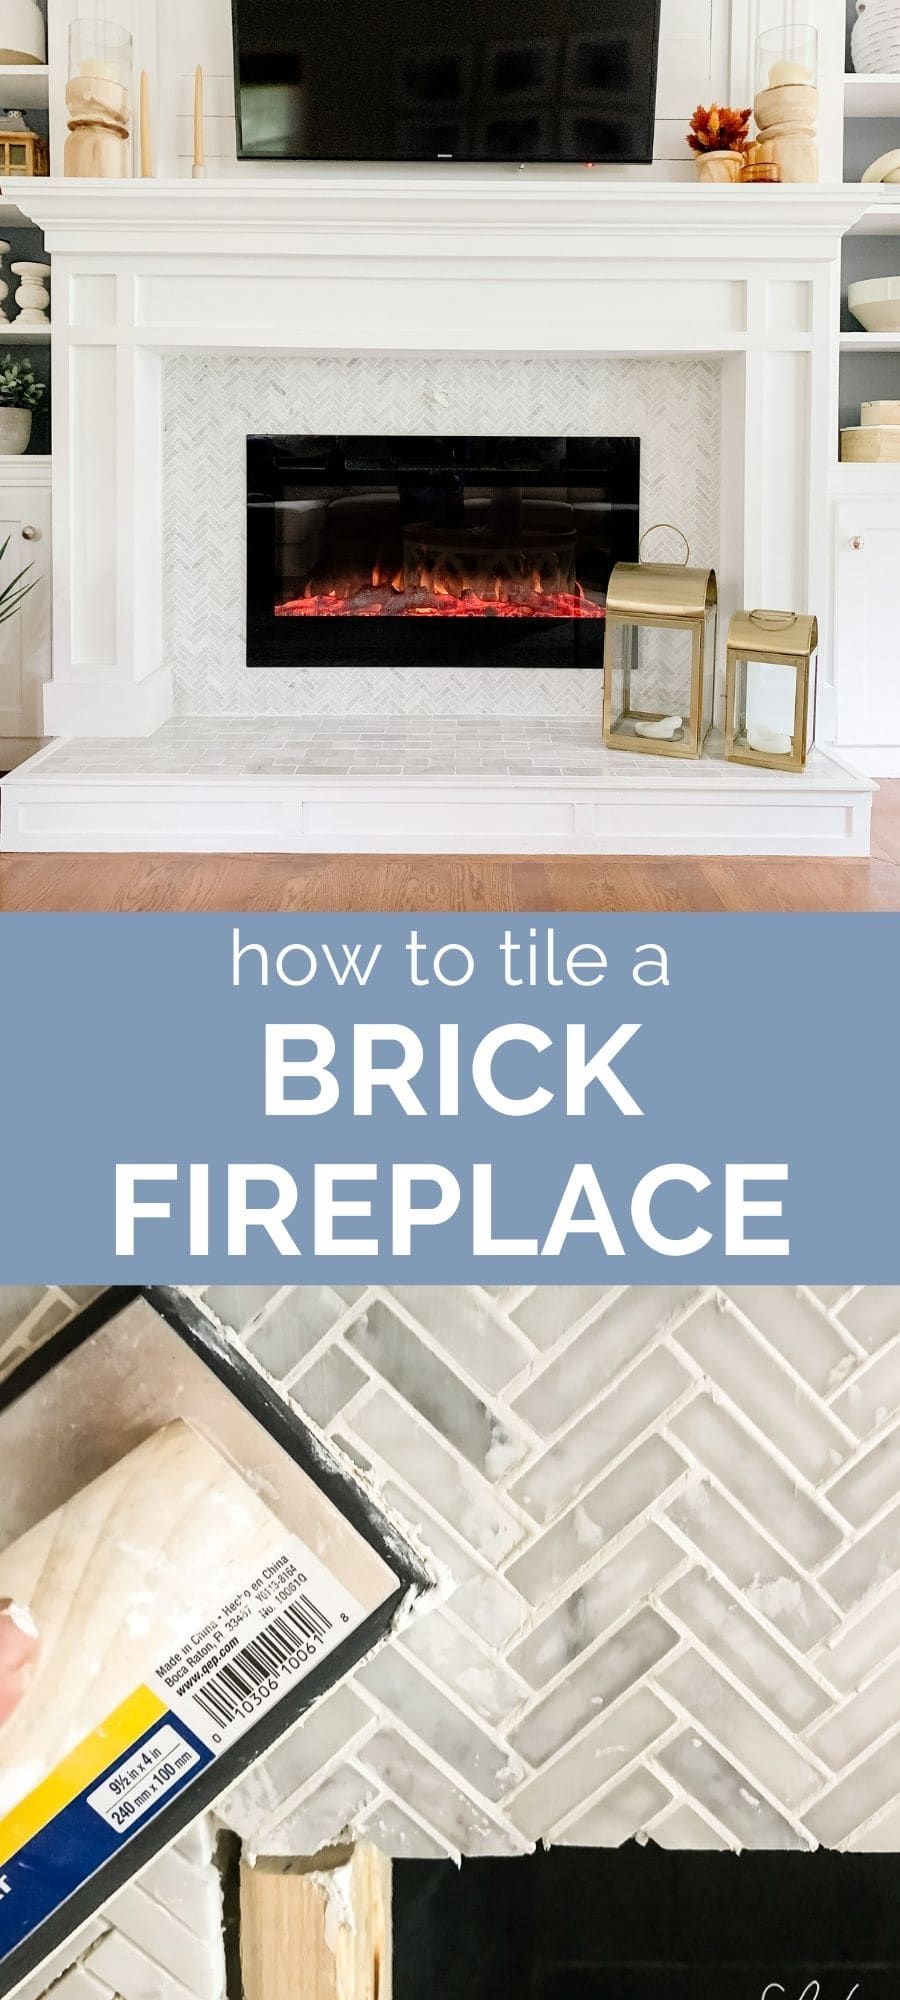 How To Tile A Brick Fireplace Jenna, How To Replace Tile Around Fireplace With Stone